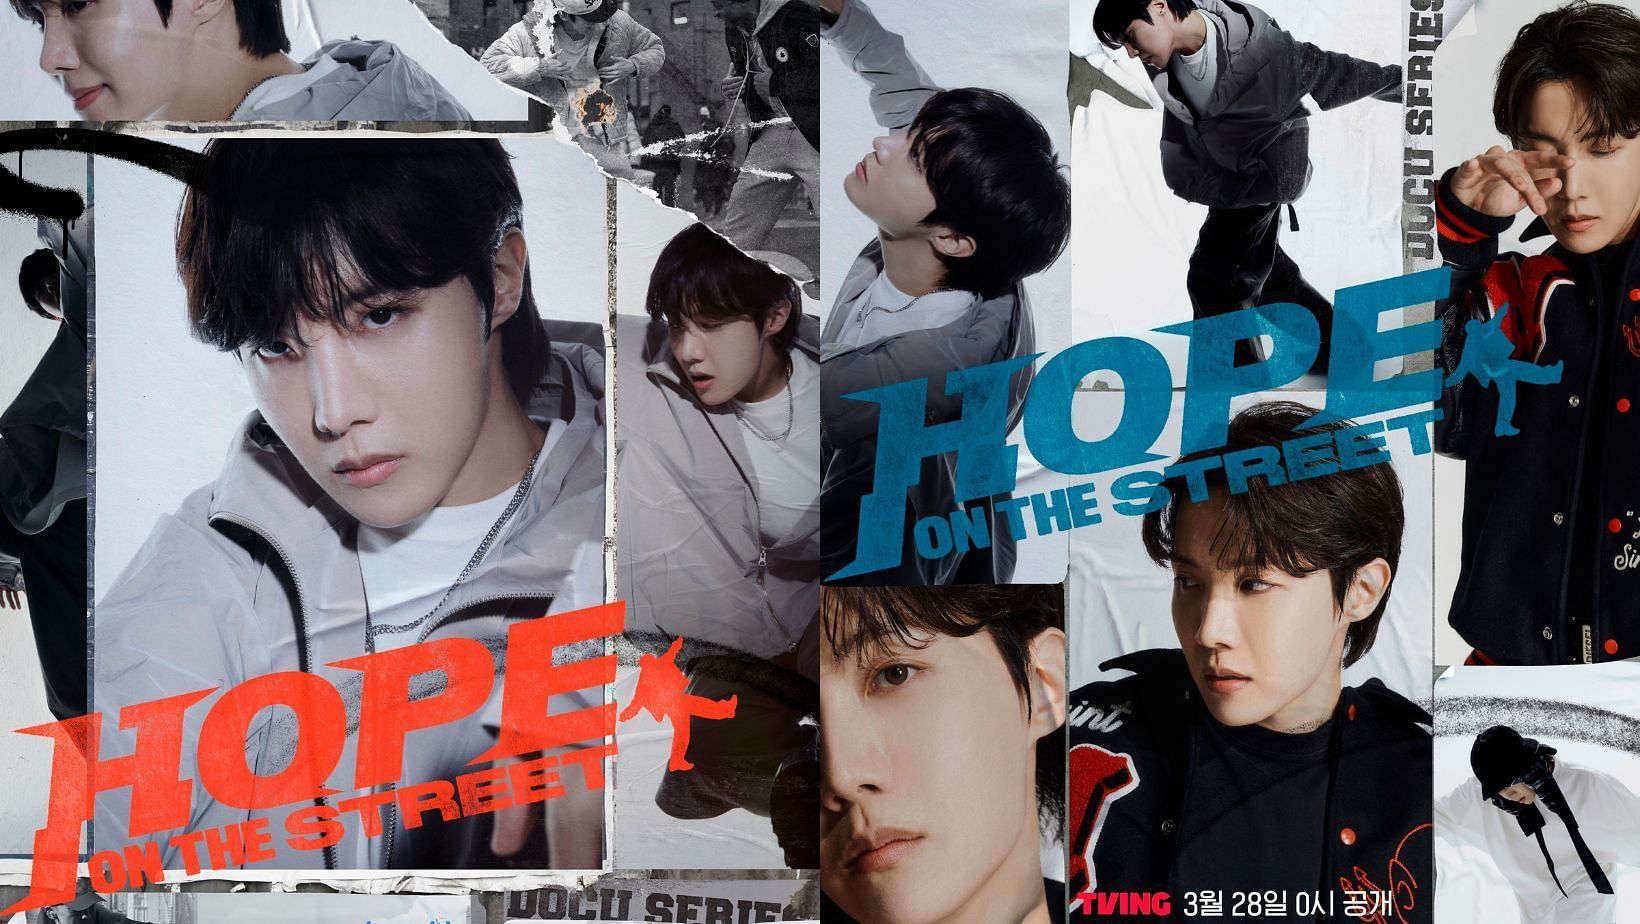 BIGHIT MUSIC releases BTS J-Hope&rsquo;s interview video before his upcoming docuseries &lsquo;HOPE ON THE STREET&rsquo;. (Images via X/@bts_bighit)